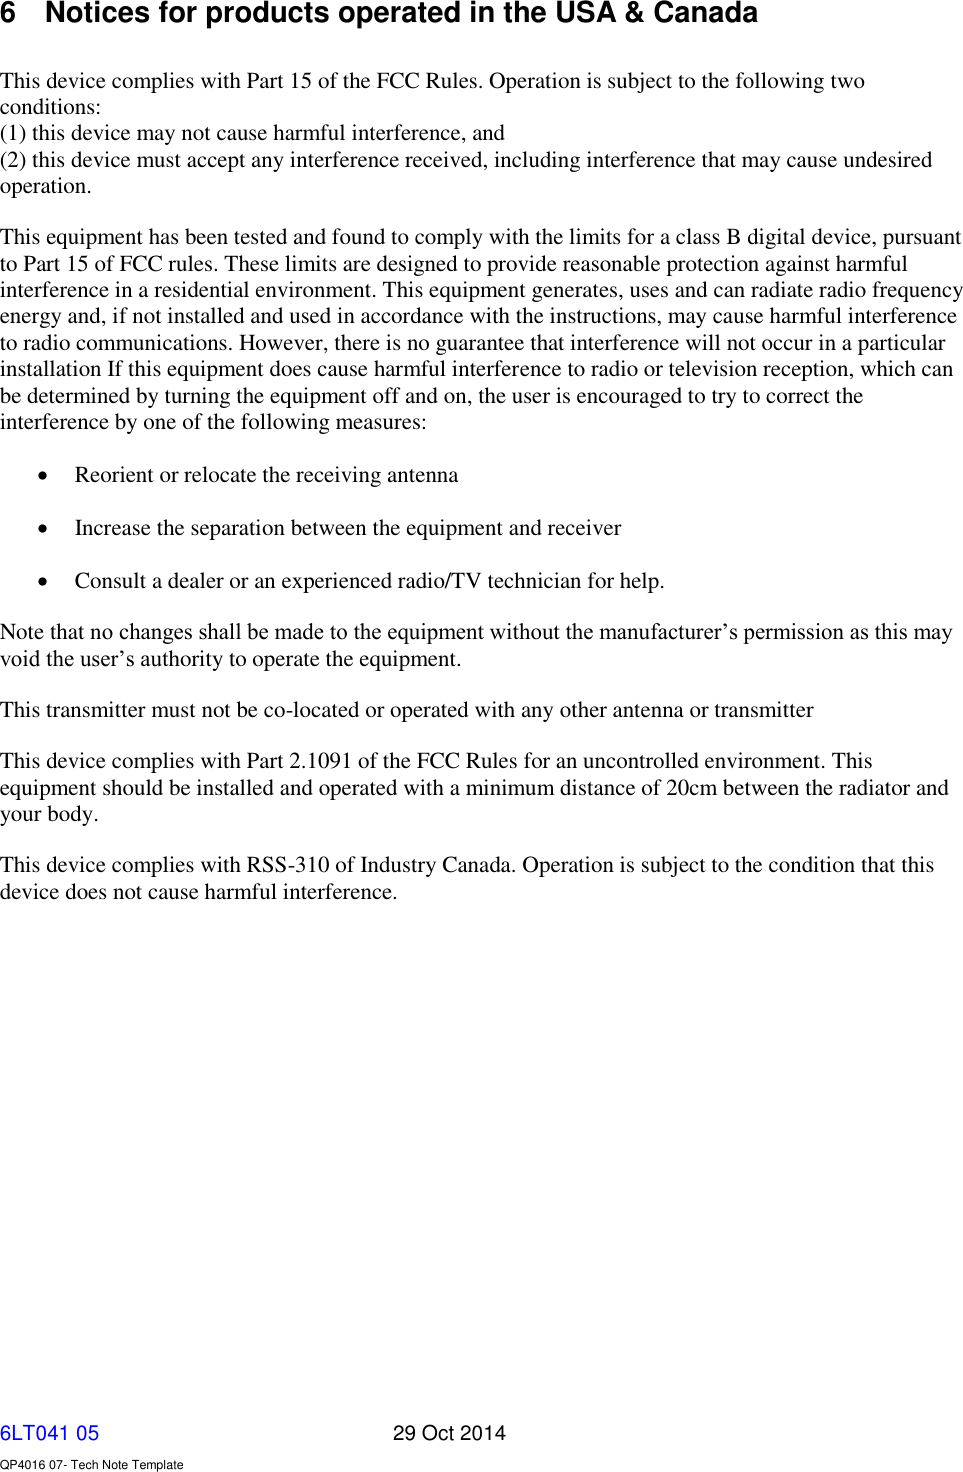   6LT041 05       29 Oct 2014    QP4016 07- Tech Note Template 6  Notices for products operated in the USA &amp; Canada  This device complies with Part 15 of the FCC Rules. Operation is subject to the following two conditions: (1) this device may not cause harmful interference, and (2) this device must accept any interference received, including interference that may cause undesired operation. This equipment has been tested and found to comply with the limits for a class B digital device, pursuant to Part 15 of FCC rules. These limits are designed to provide reasonable protection against harmful interference in a residential environment. This equipment generates, uses and can radiate radio frequency energy and, if not installed and used in accordance with the instructions, may cause harmful interference to radio communications. However, there is no guarantee that interference will not occur in a particular installation If this equipment does cause harmful interference to radio or television reception, which can be determined by turning the equipment off and on, the user is encouraged to try to correct the interference by one of the following measures:  Reorient or relocate the receiving antenna  Increase the separation between the equipment and receiver  Consult a dealer or an experienced radio/TV technician for help. Note that no changes shall be made to the equipment without the manufacturer’s permission as this may void the user’s authority to operate the equipment. This transmitter must not be co-located or operated with any other antenna or transmitter This device complies with Part 2.1091 of the FCC Rules for an uncontrolled environment. This equipment should be installed and operated with a minimum distance of 20cm between the radiator and your body. This device complies with RSS-310 of Industry Canada. Operation is subject to the condition that this device does not cause harmful interference.   